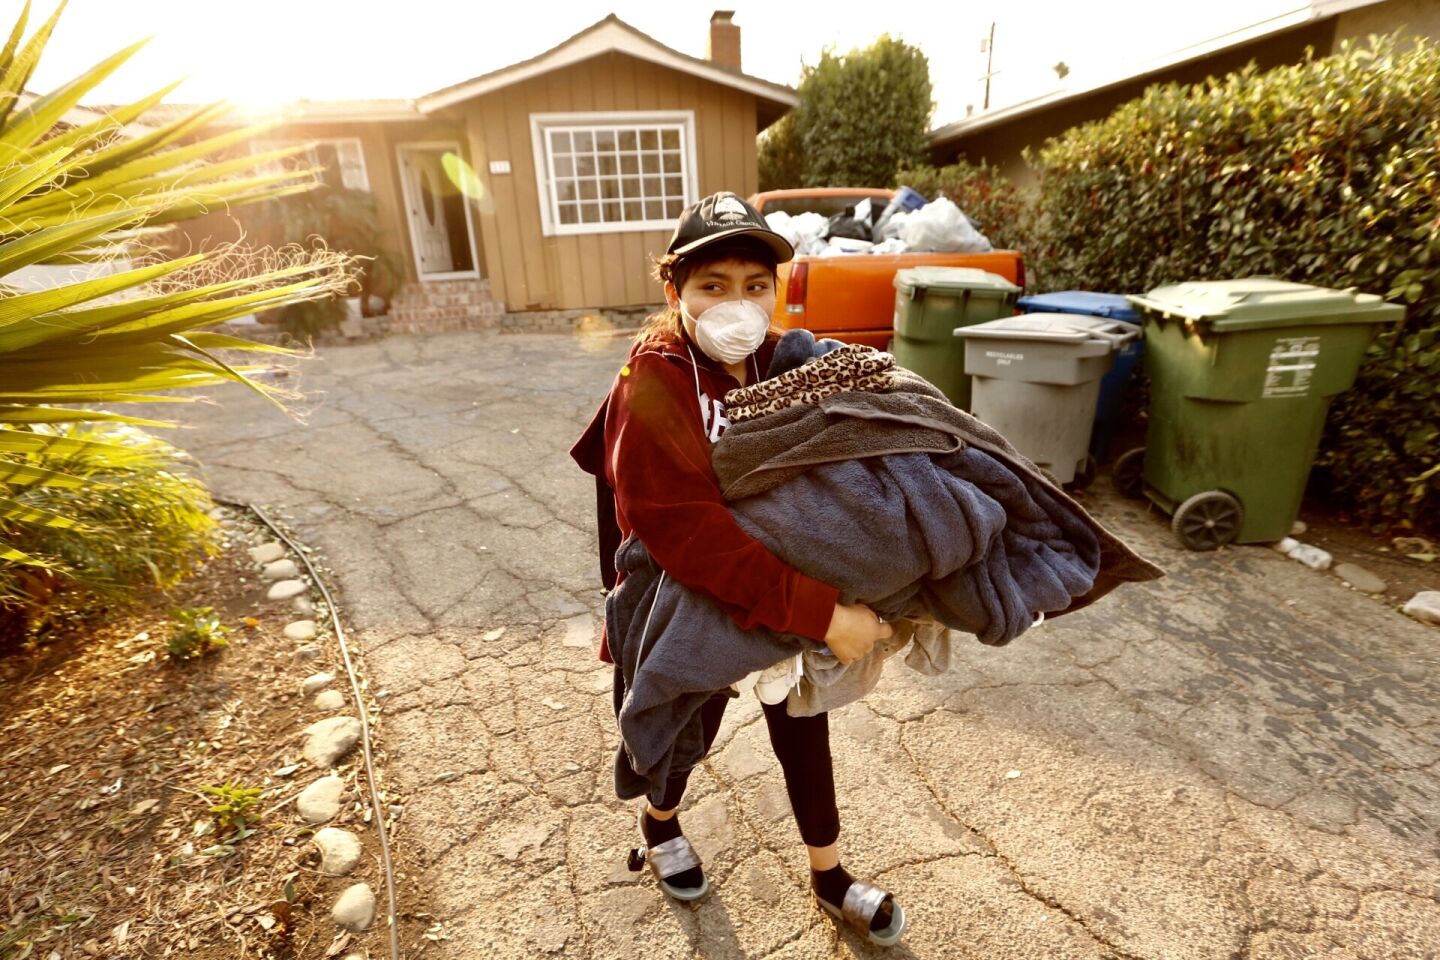 Maria Narvaez evacuates her home on Almon Dr. near Hillcrest in Thousand Oaks as Santa Ana winds continue to blow Friday morning.